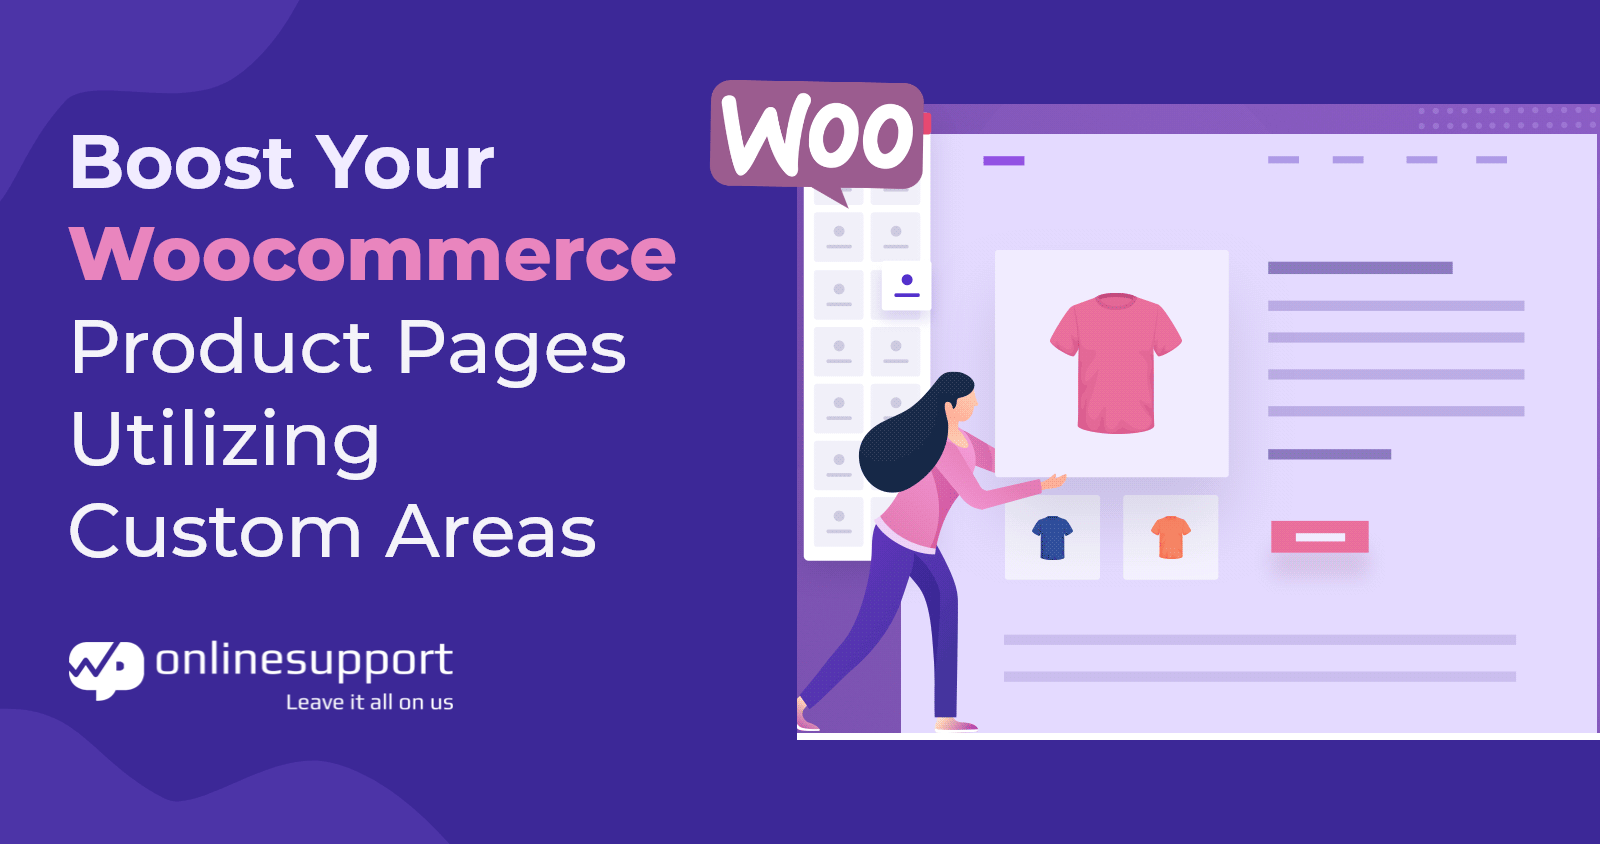 Boost Your Woocommerce Product Pages Utilizing Custom Areas